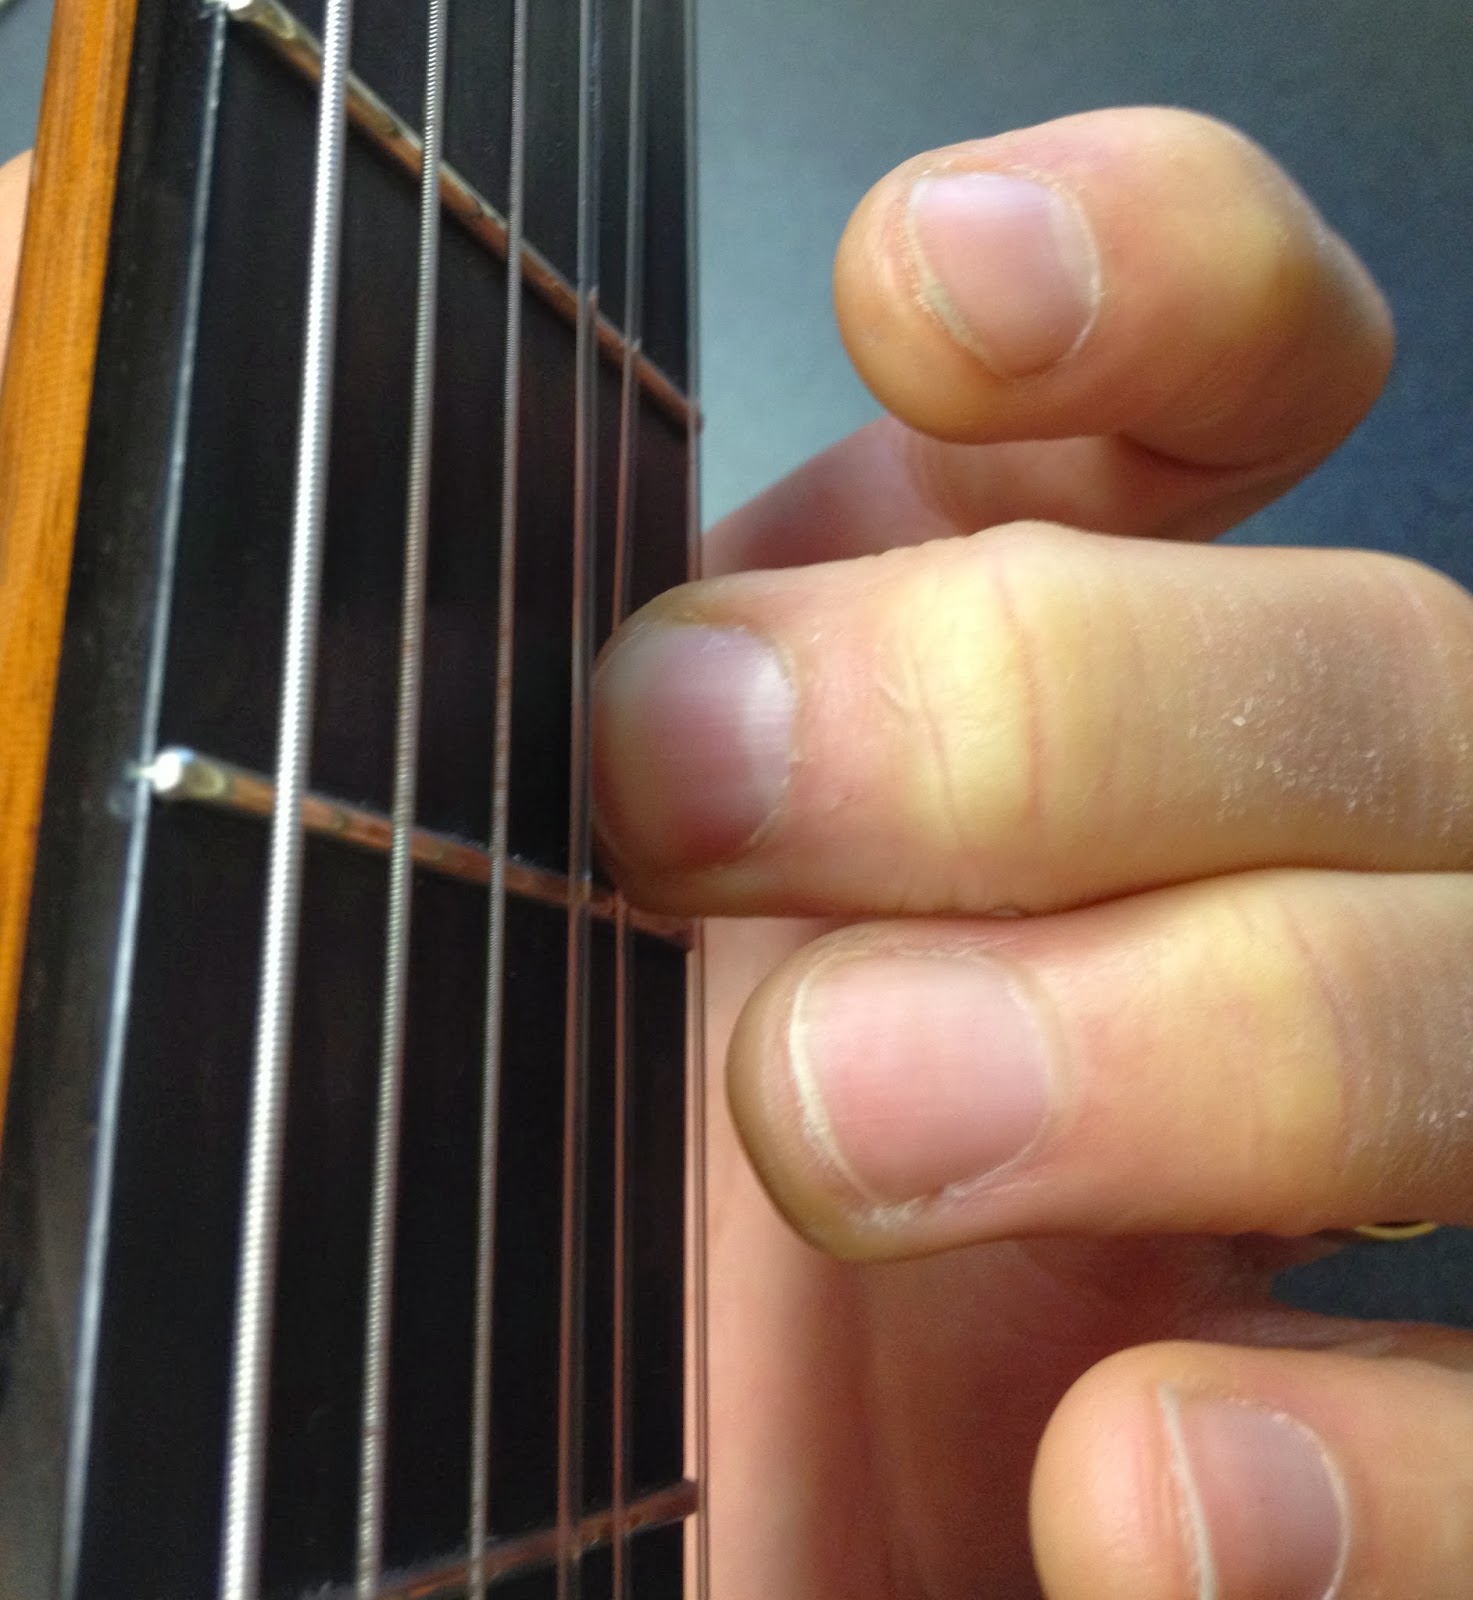 Guitar Nails -Trim the Perfect FINGERNAILS for Playing Guitar - How To Clip  - Guitar Songs Master | Guitar fingers, Playing guitar, Trim nails